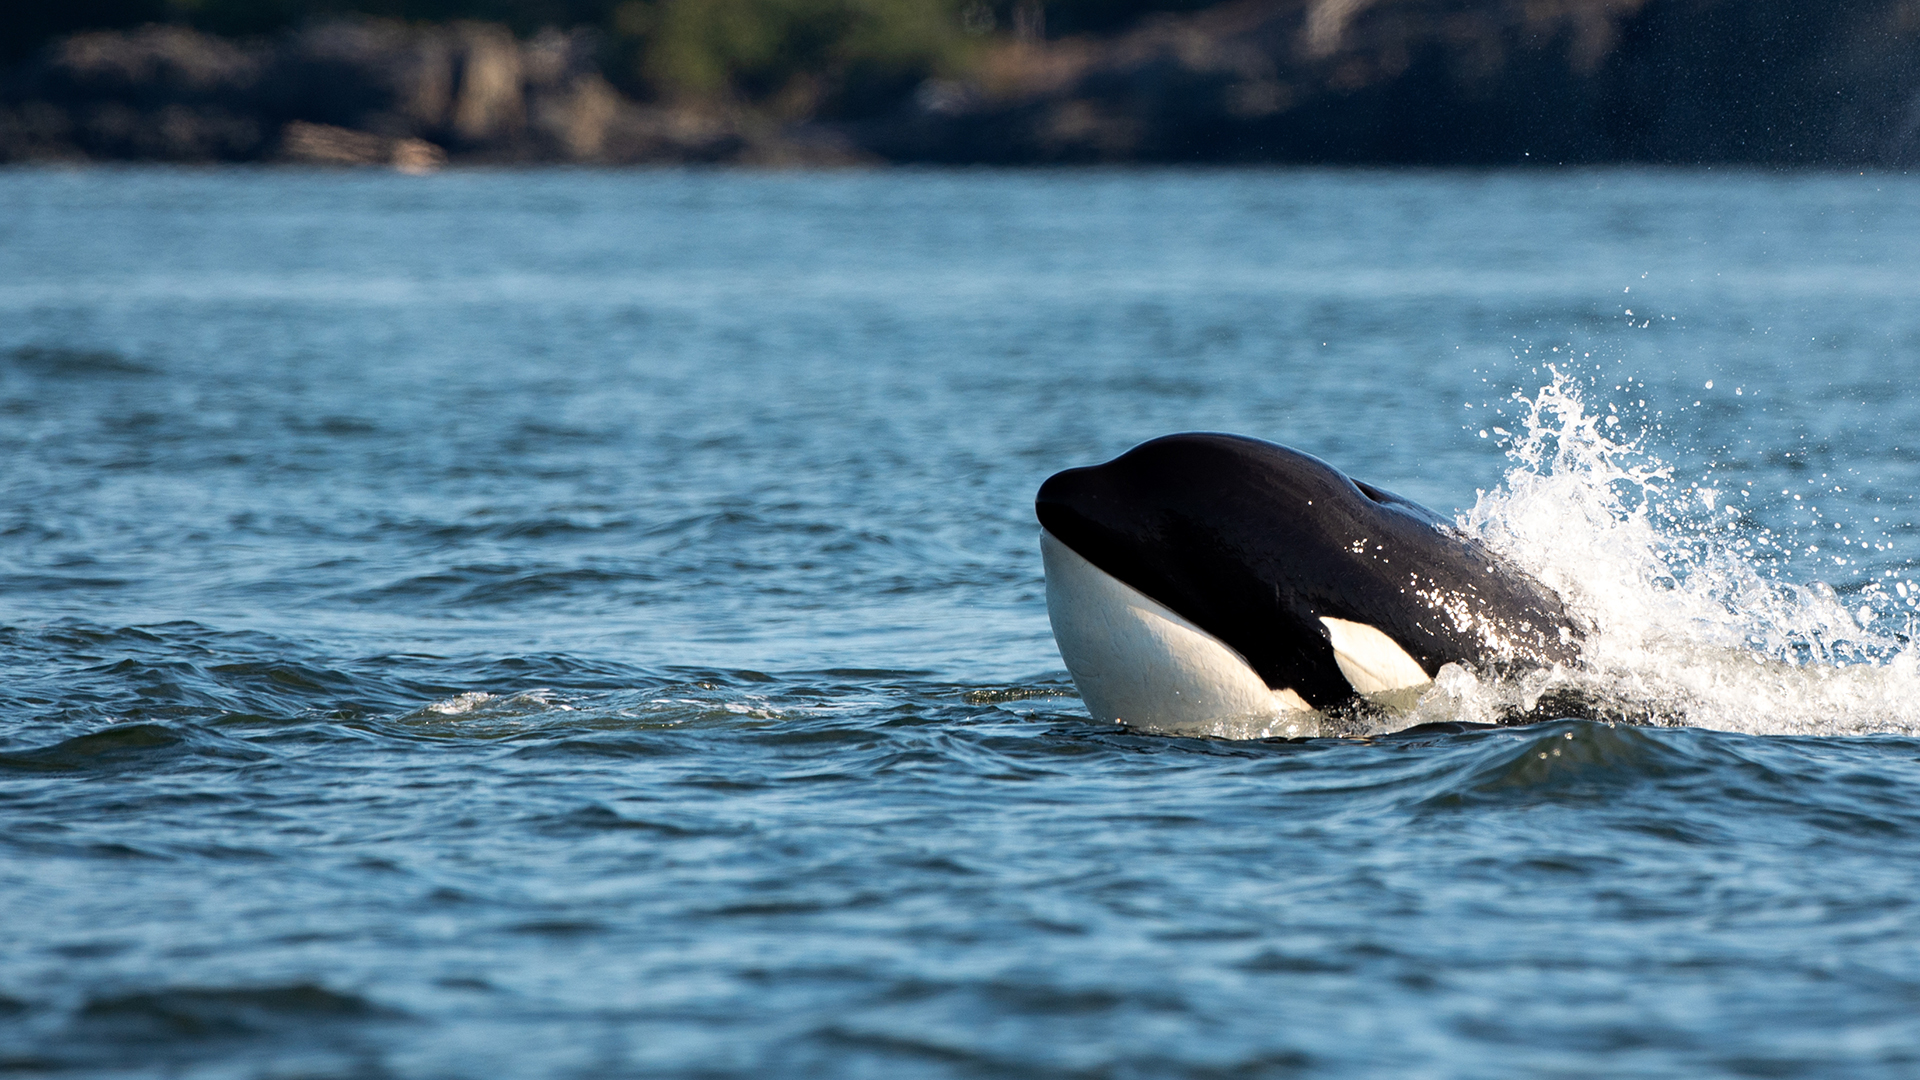 A transient Orca whale or killer whale jumping out of water in Orcinus orca, Vancouver Island, Canada